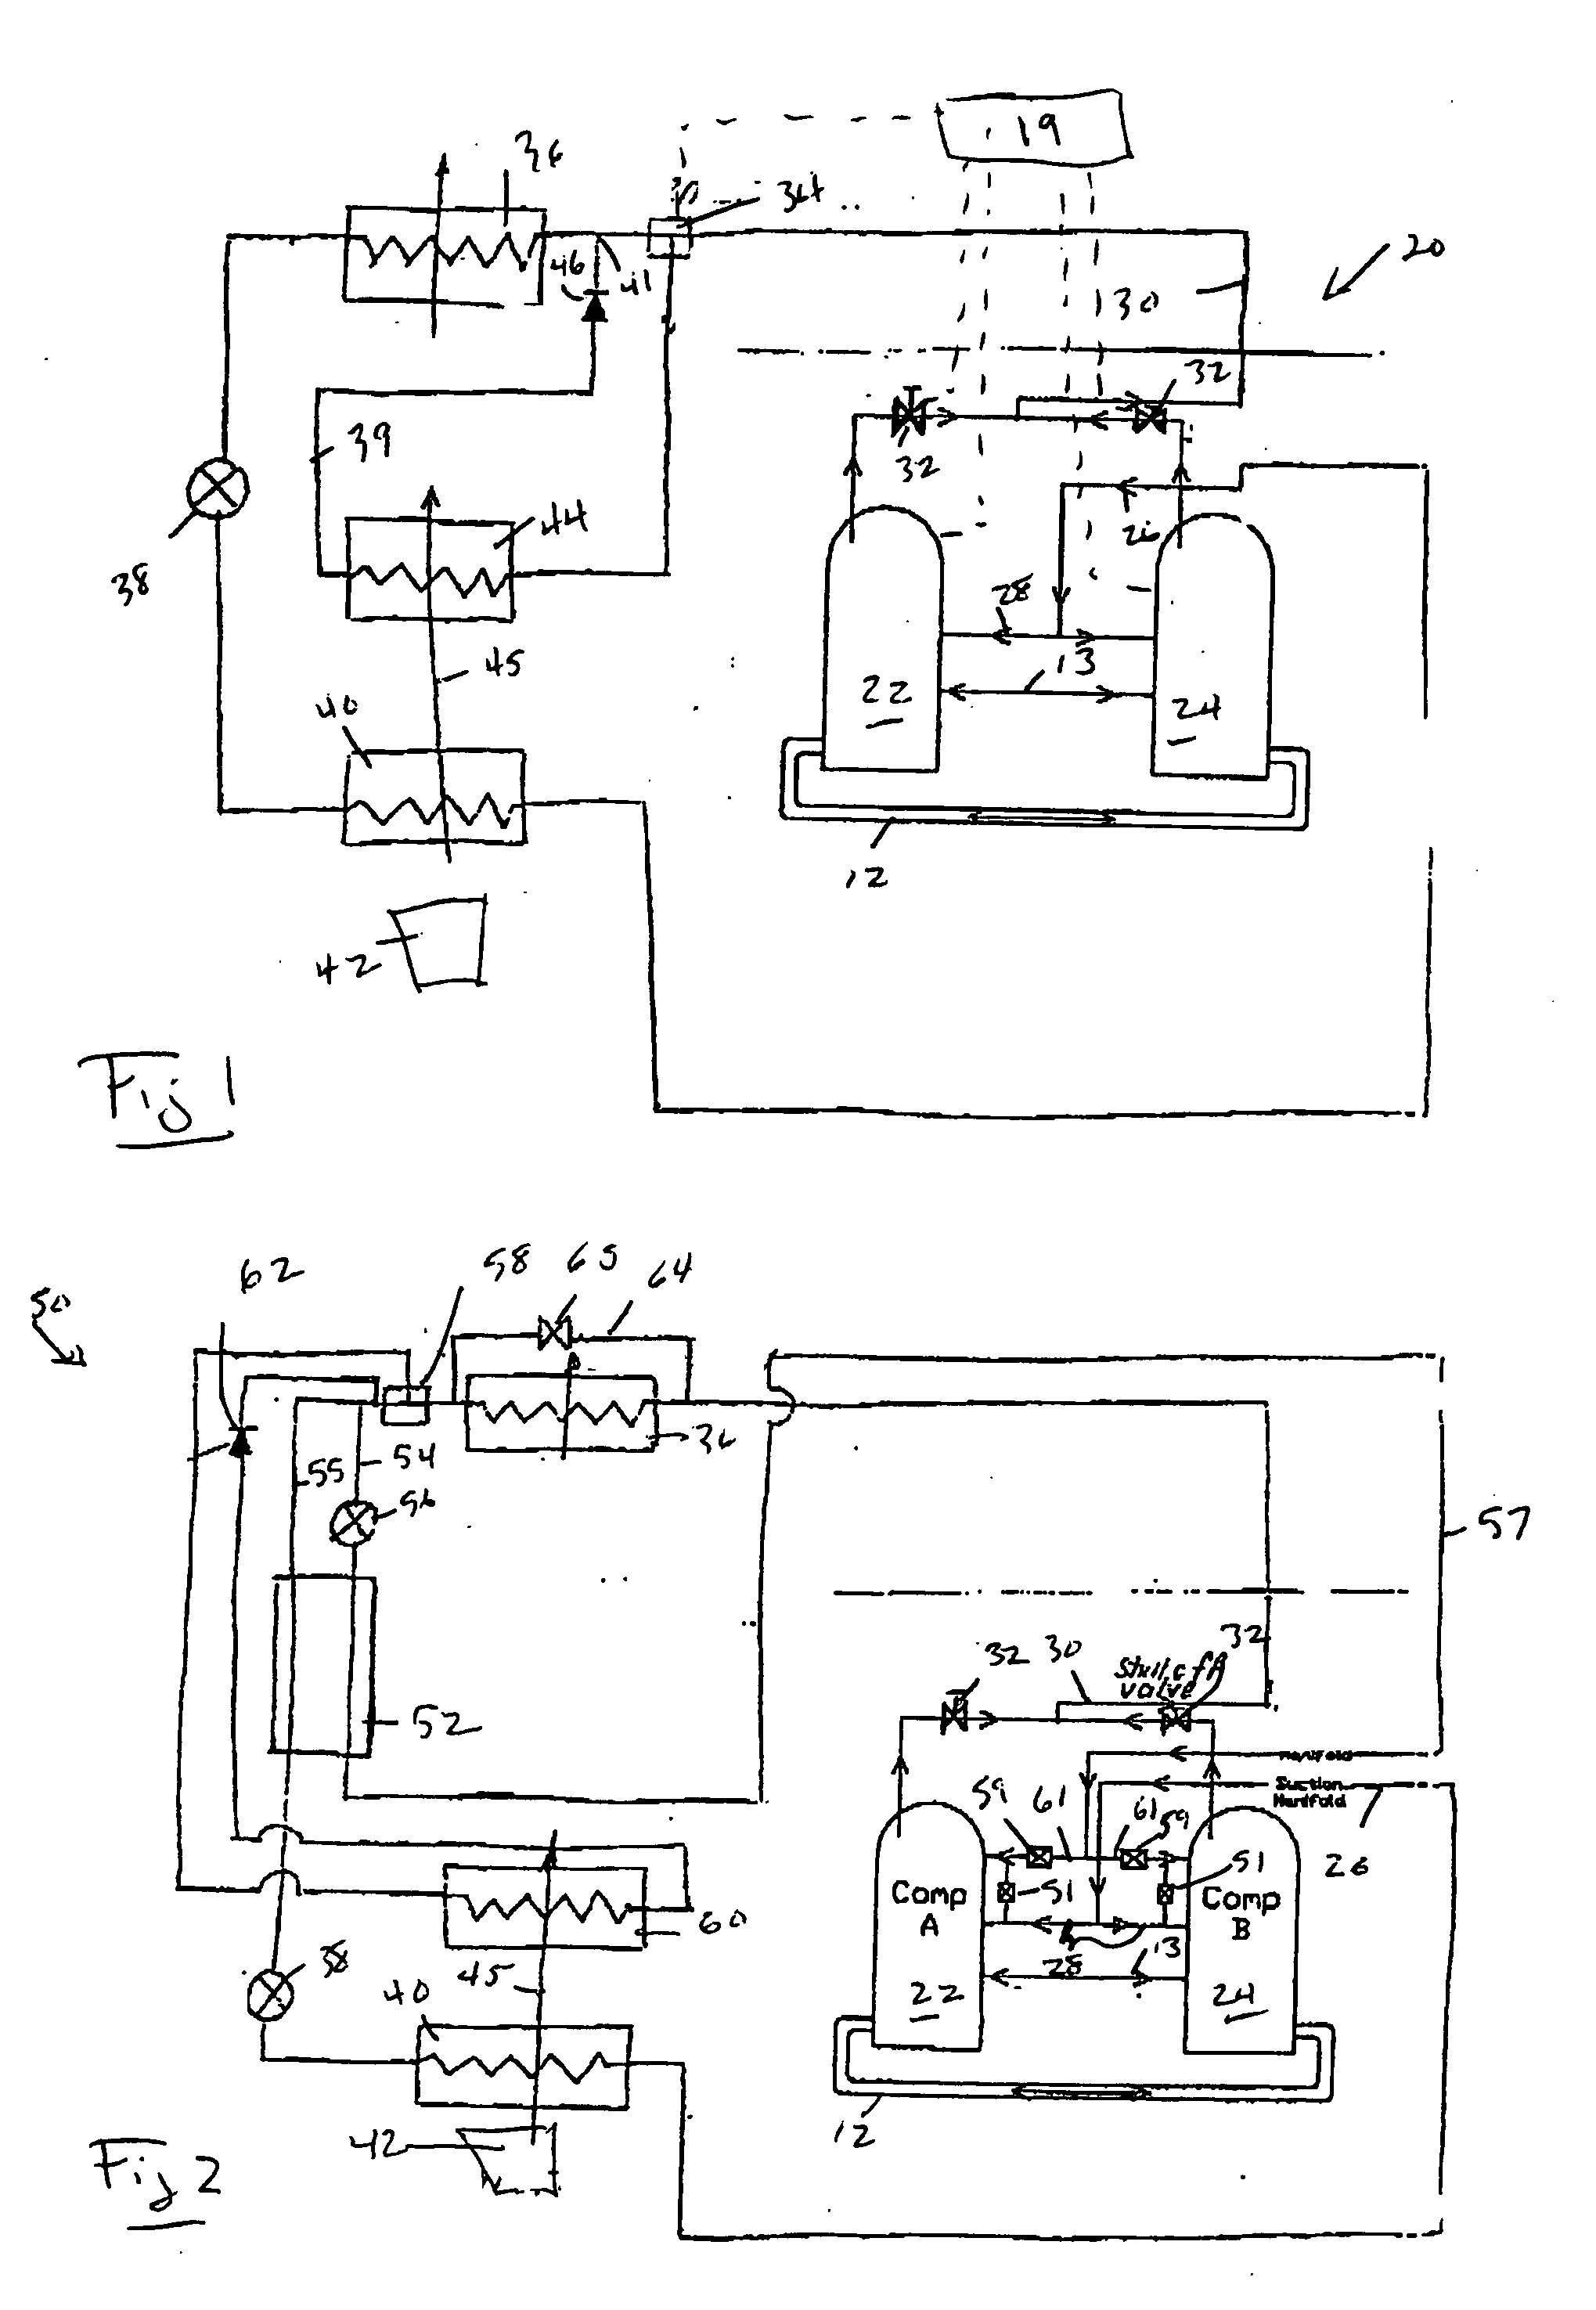 Refrigerant system with tandem compressors and reheat function